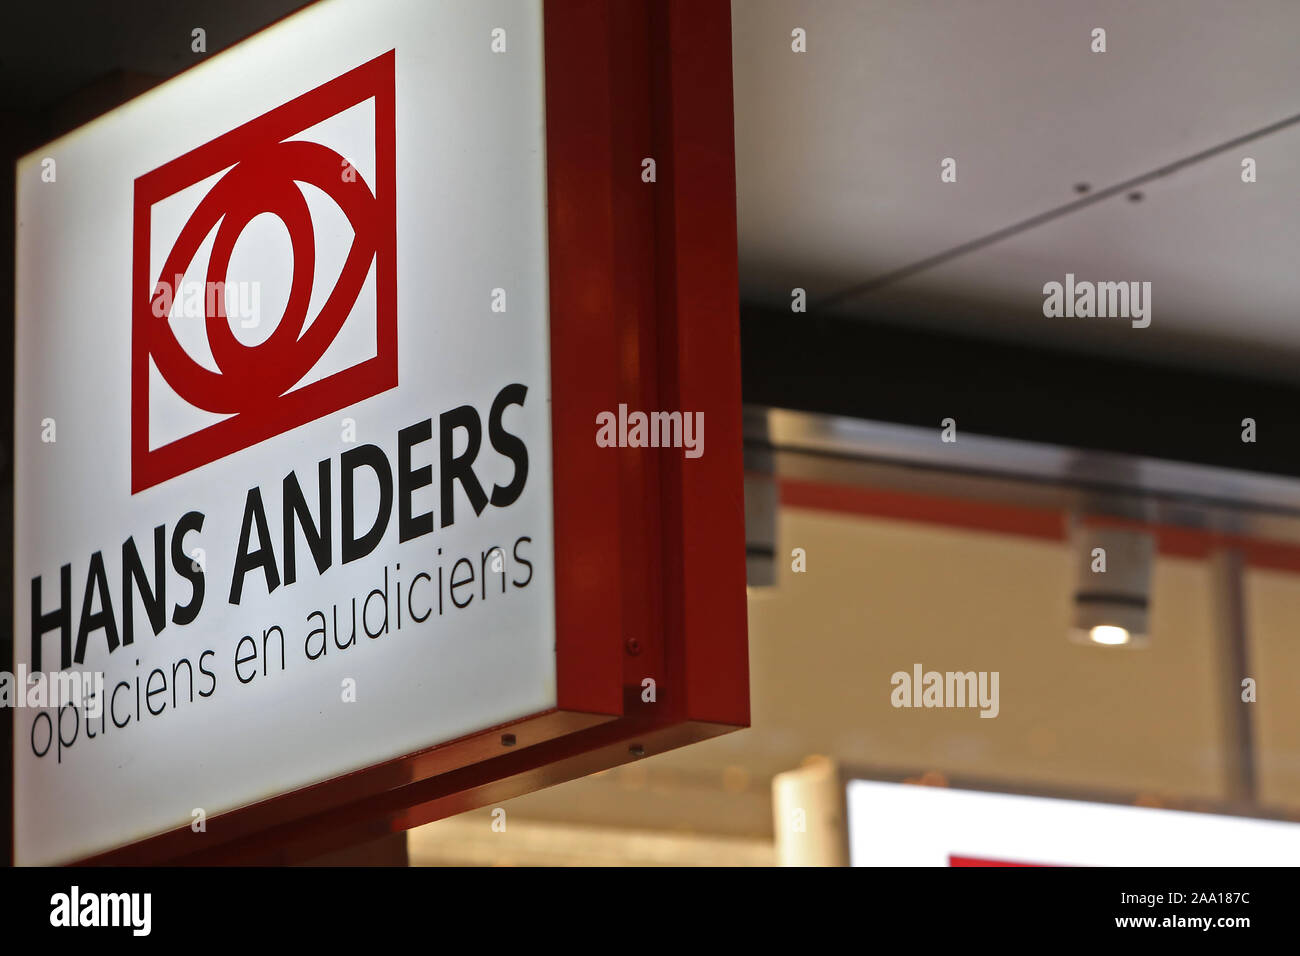 Hans Anders High Resolution Stock Photography and Images - Alamy